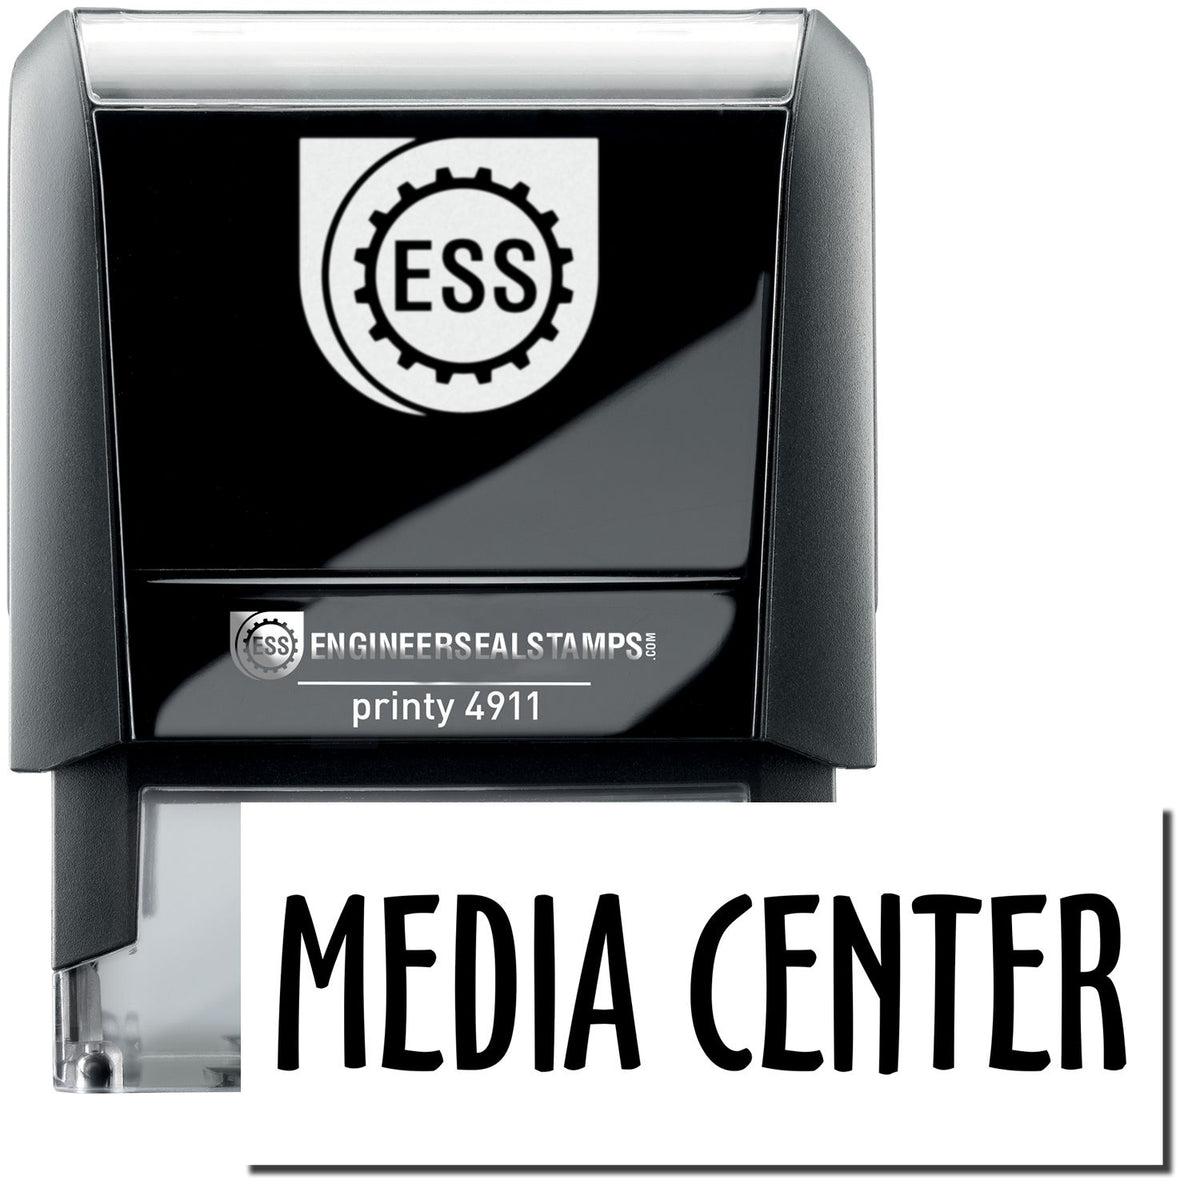 A self-inking stamp with a stamped image showing how the text &quot;MEDIA CENTER&quot; is displayed after stamping.